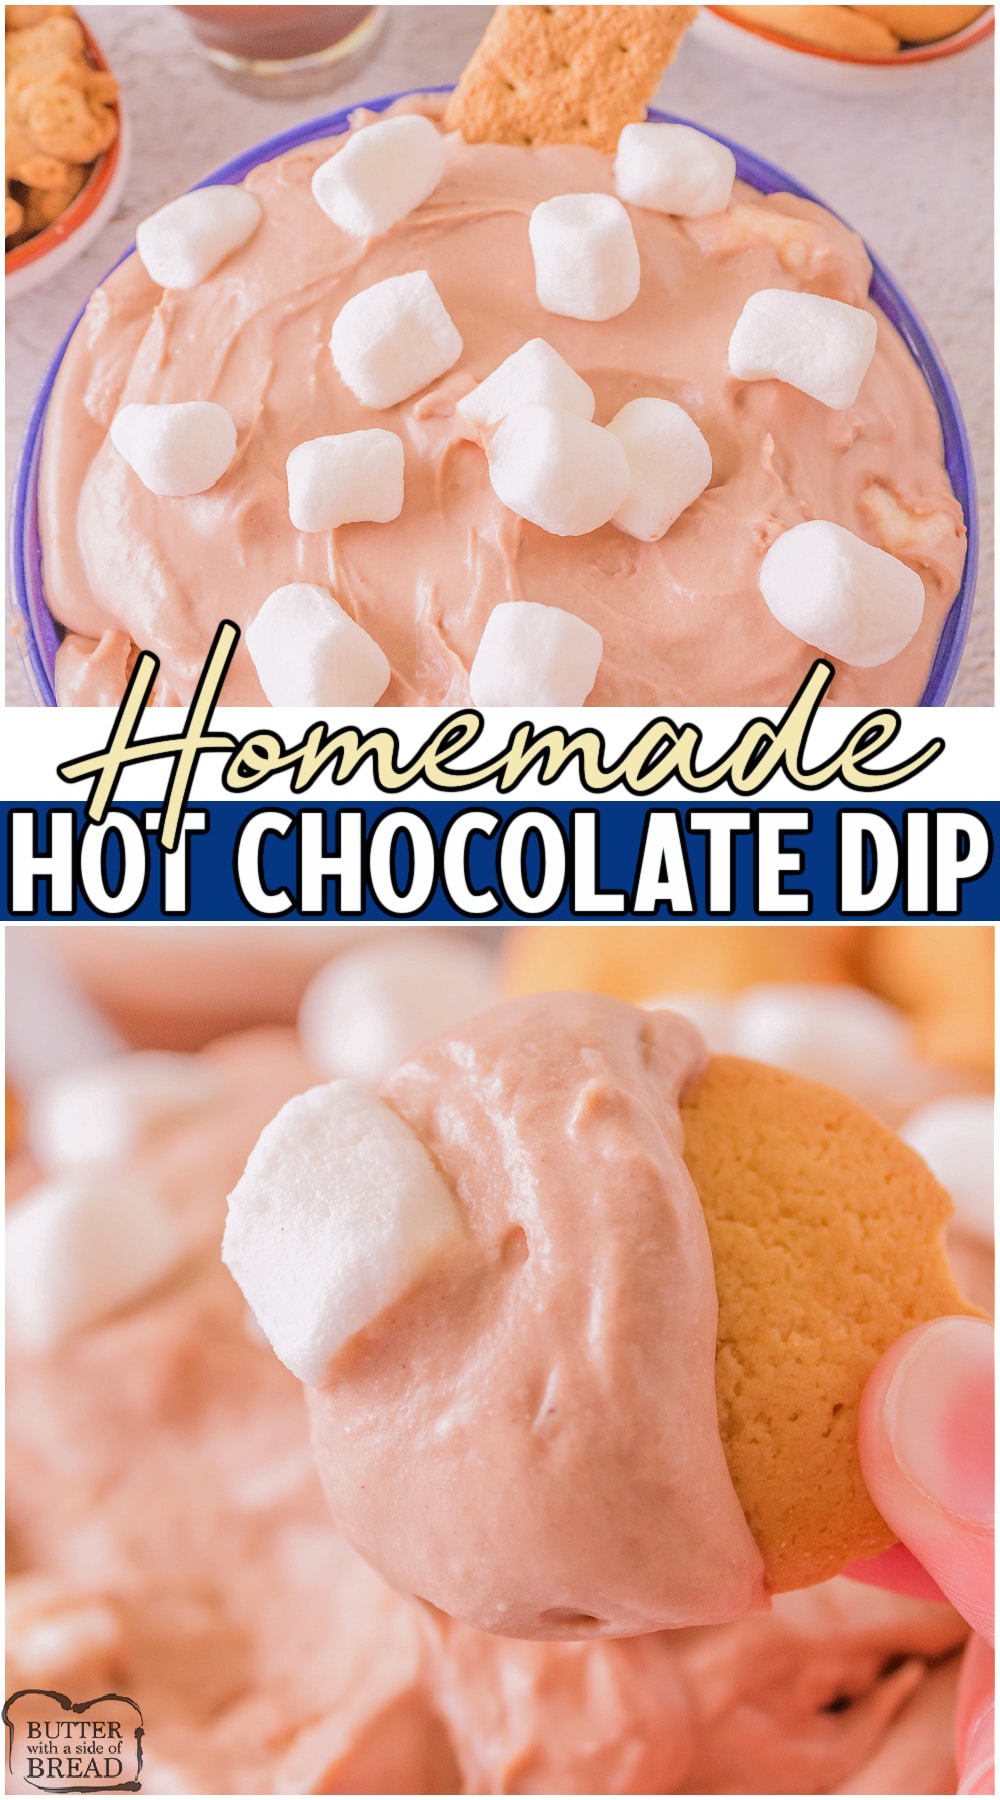 Easy Hot Chocolate Dip made with hot cocoa mix, cream cheese, whipped cream & mini marshmallows! Fun & tasty sweet chocolate dip recipe perfect for get togethers! #chocolate #snack #hotchocolate #dip #easyrecipe from BUTTER WITH A SIDE OF BREAD